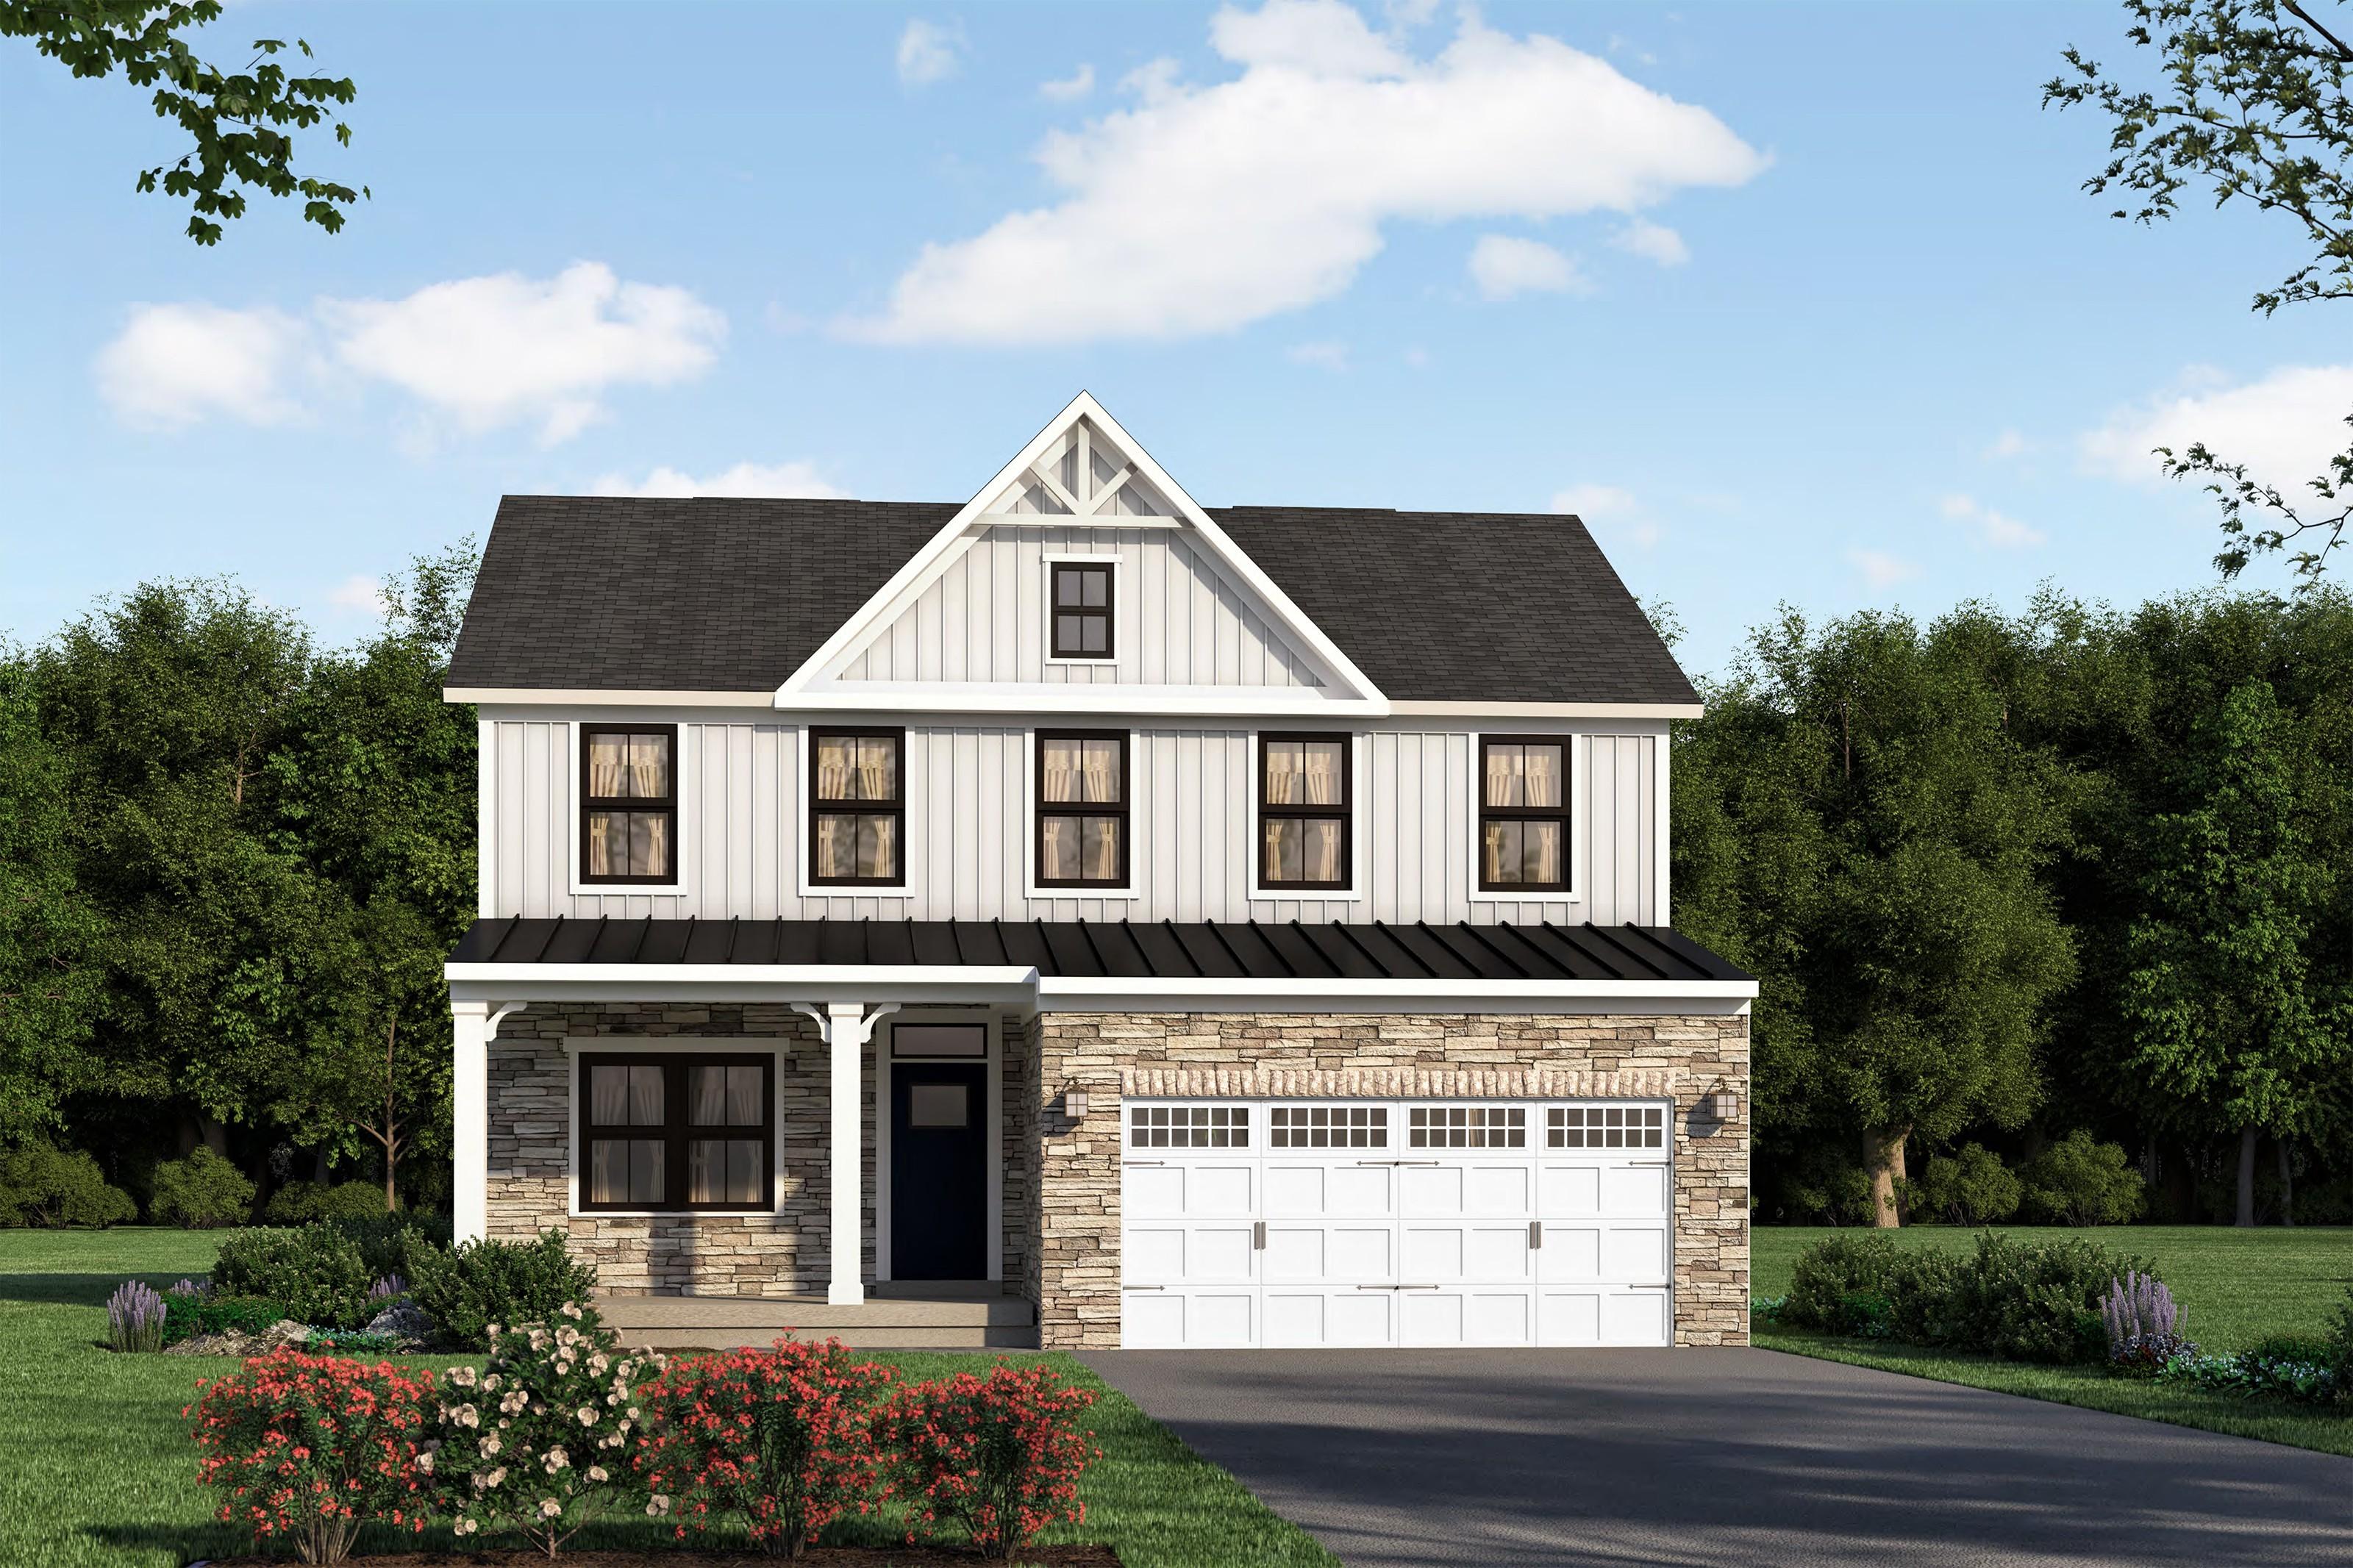 Property Image for 8220 Kirby St. Plan: Ballenger